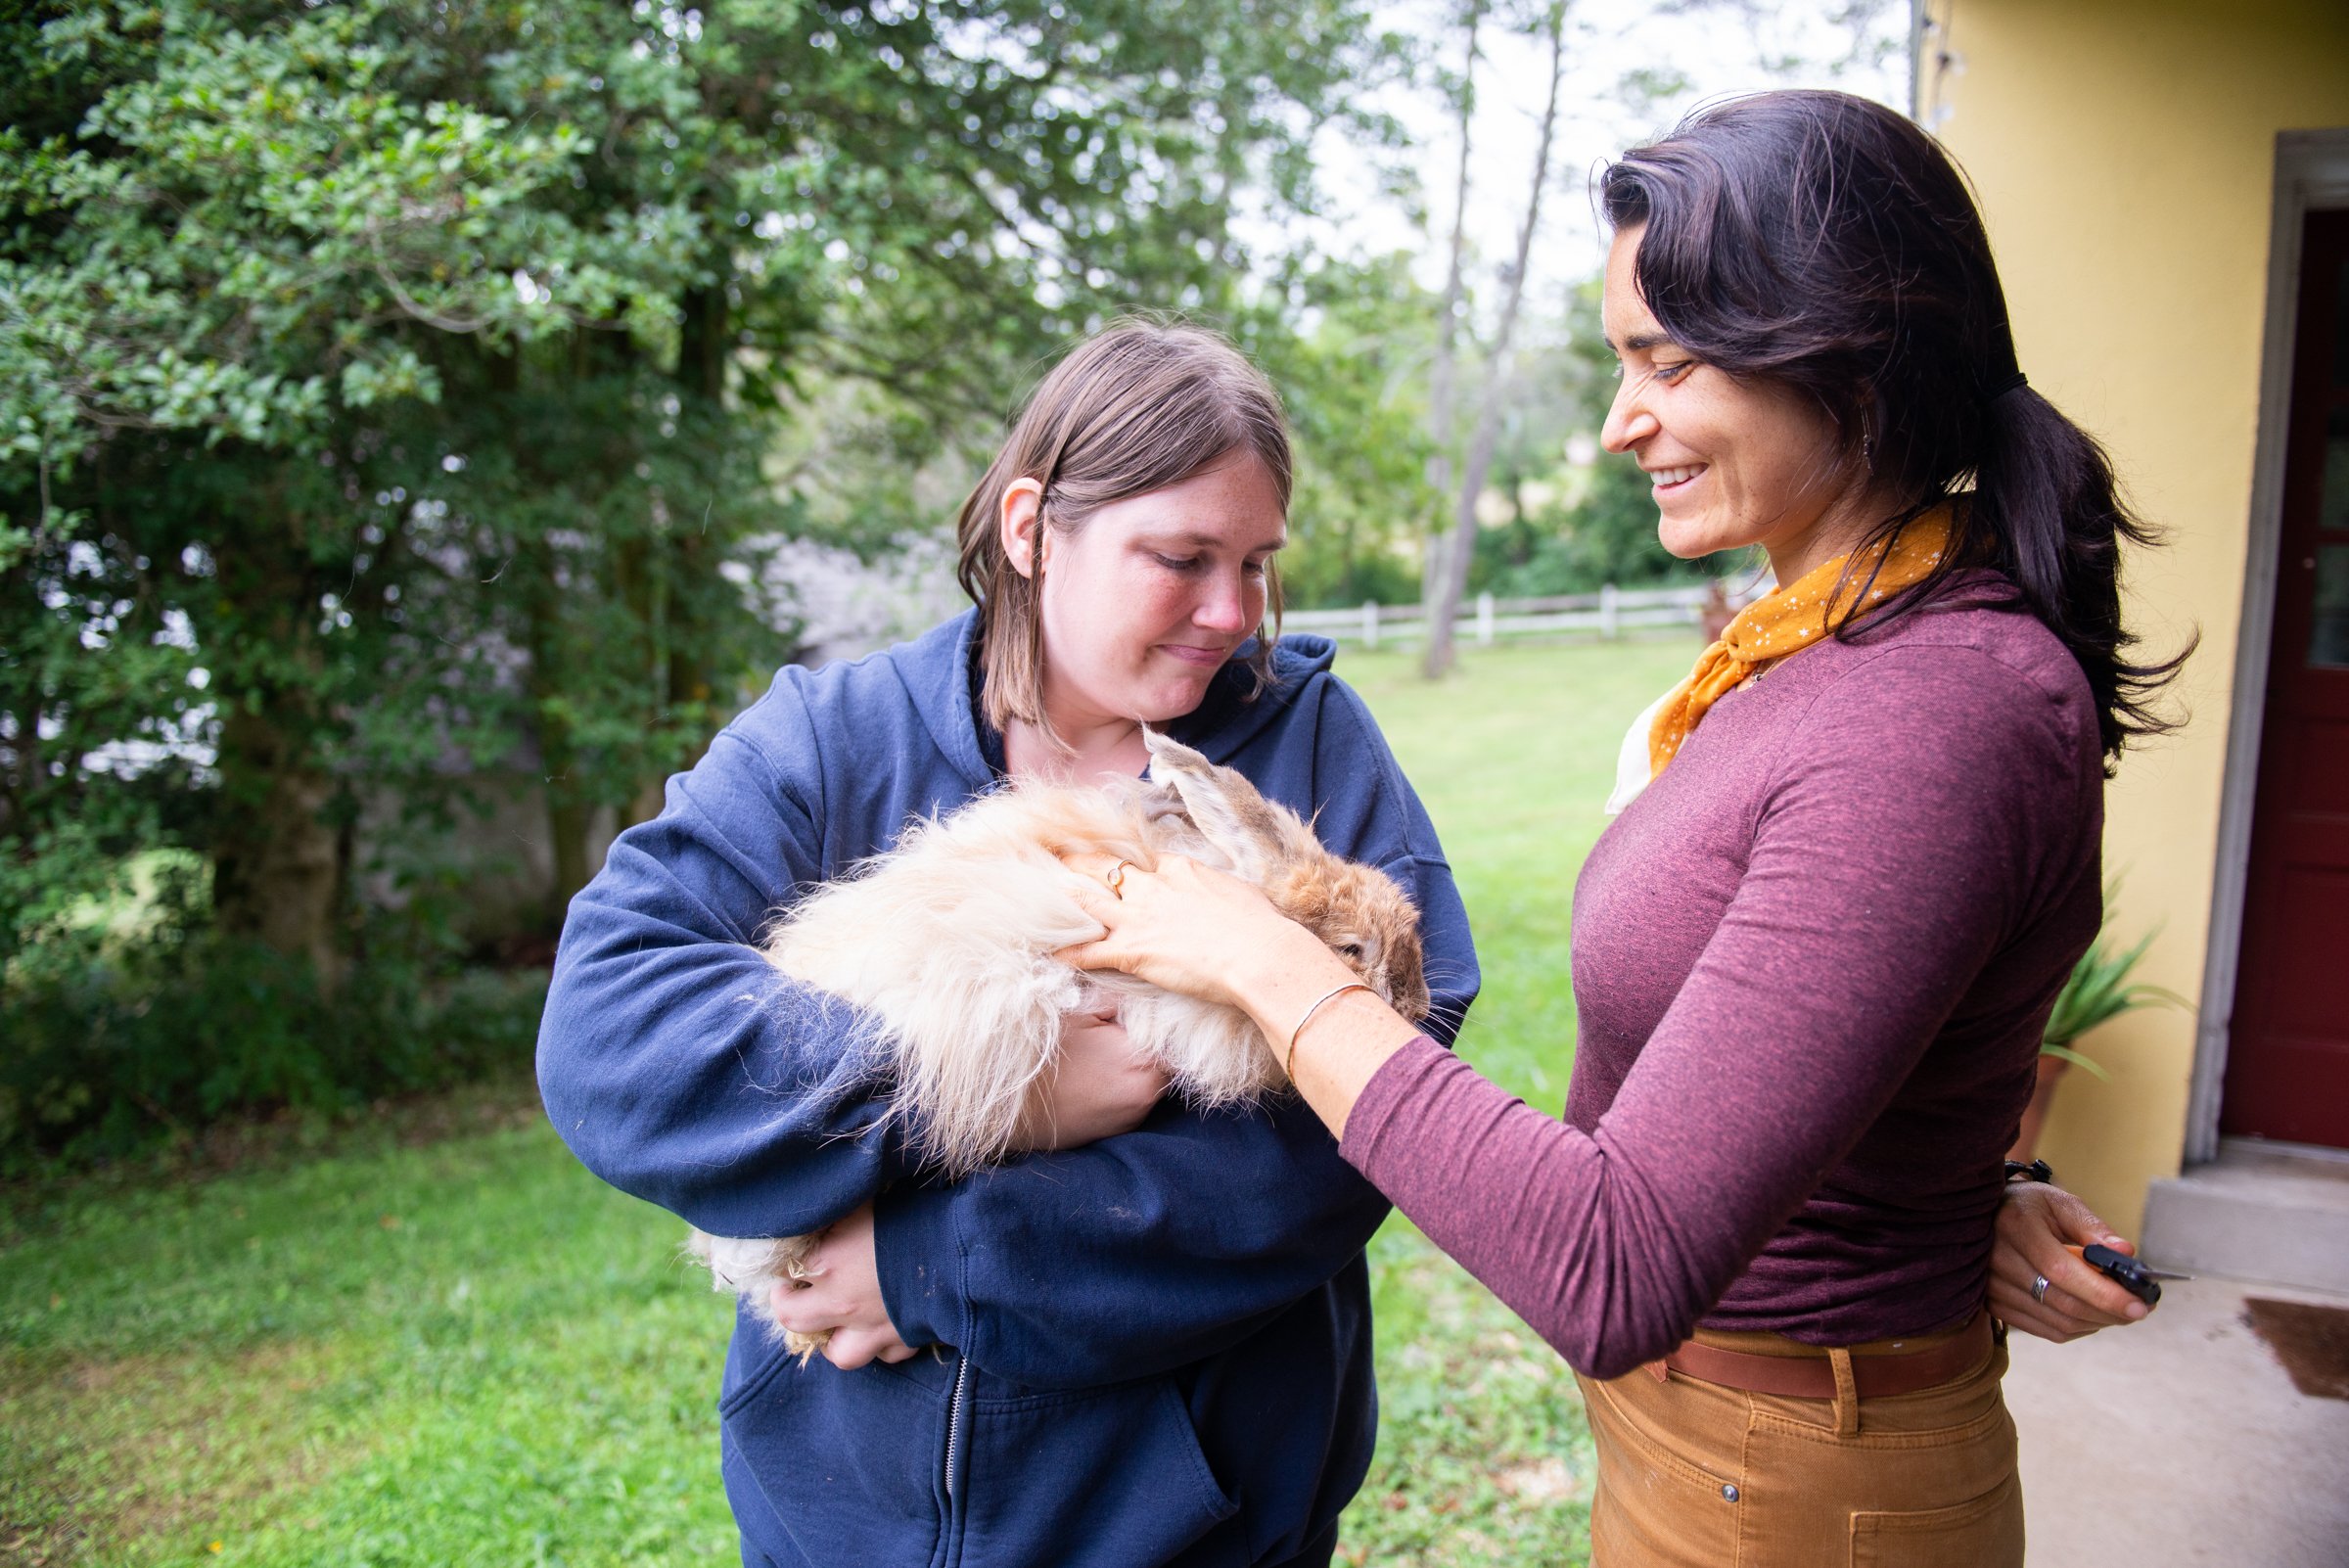 Helen K-R and Alyssa Scarborough, Land Planning and Protection Director, caring for Soltane's angora rabbit.